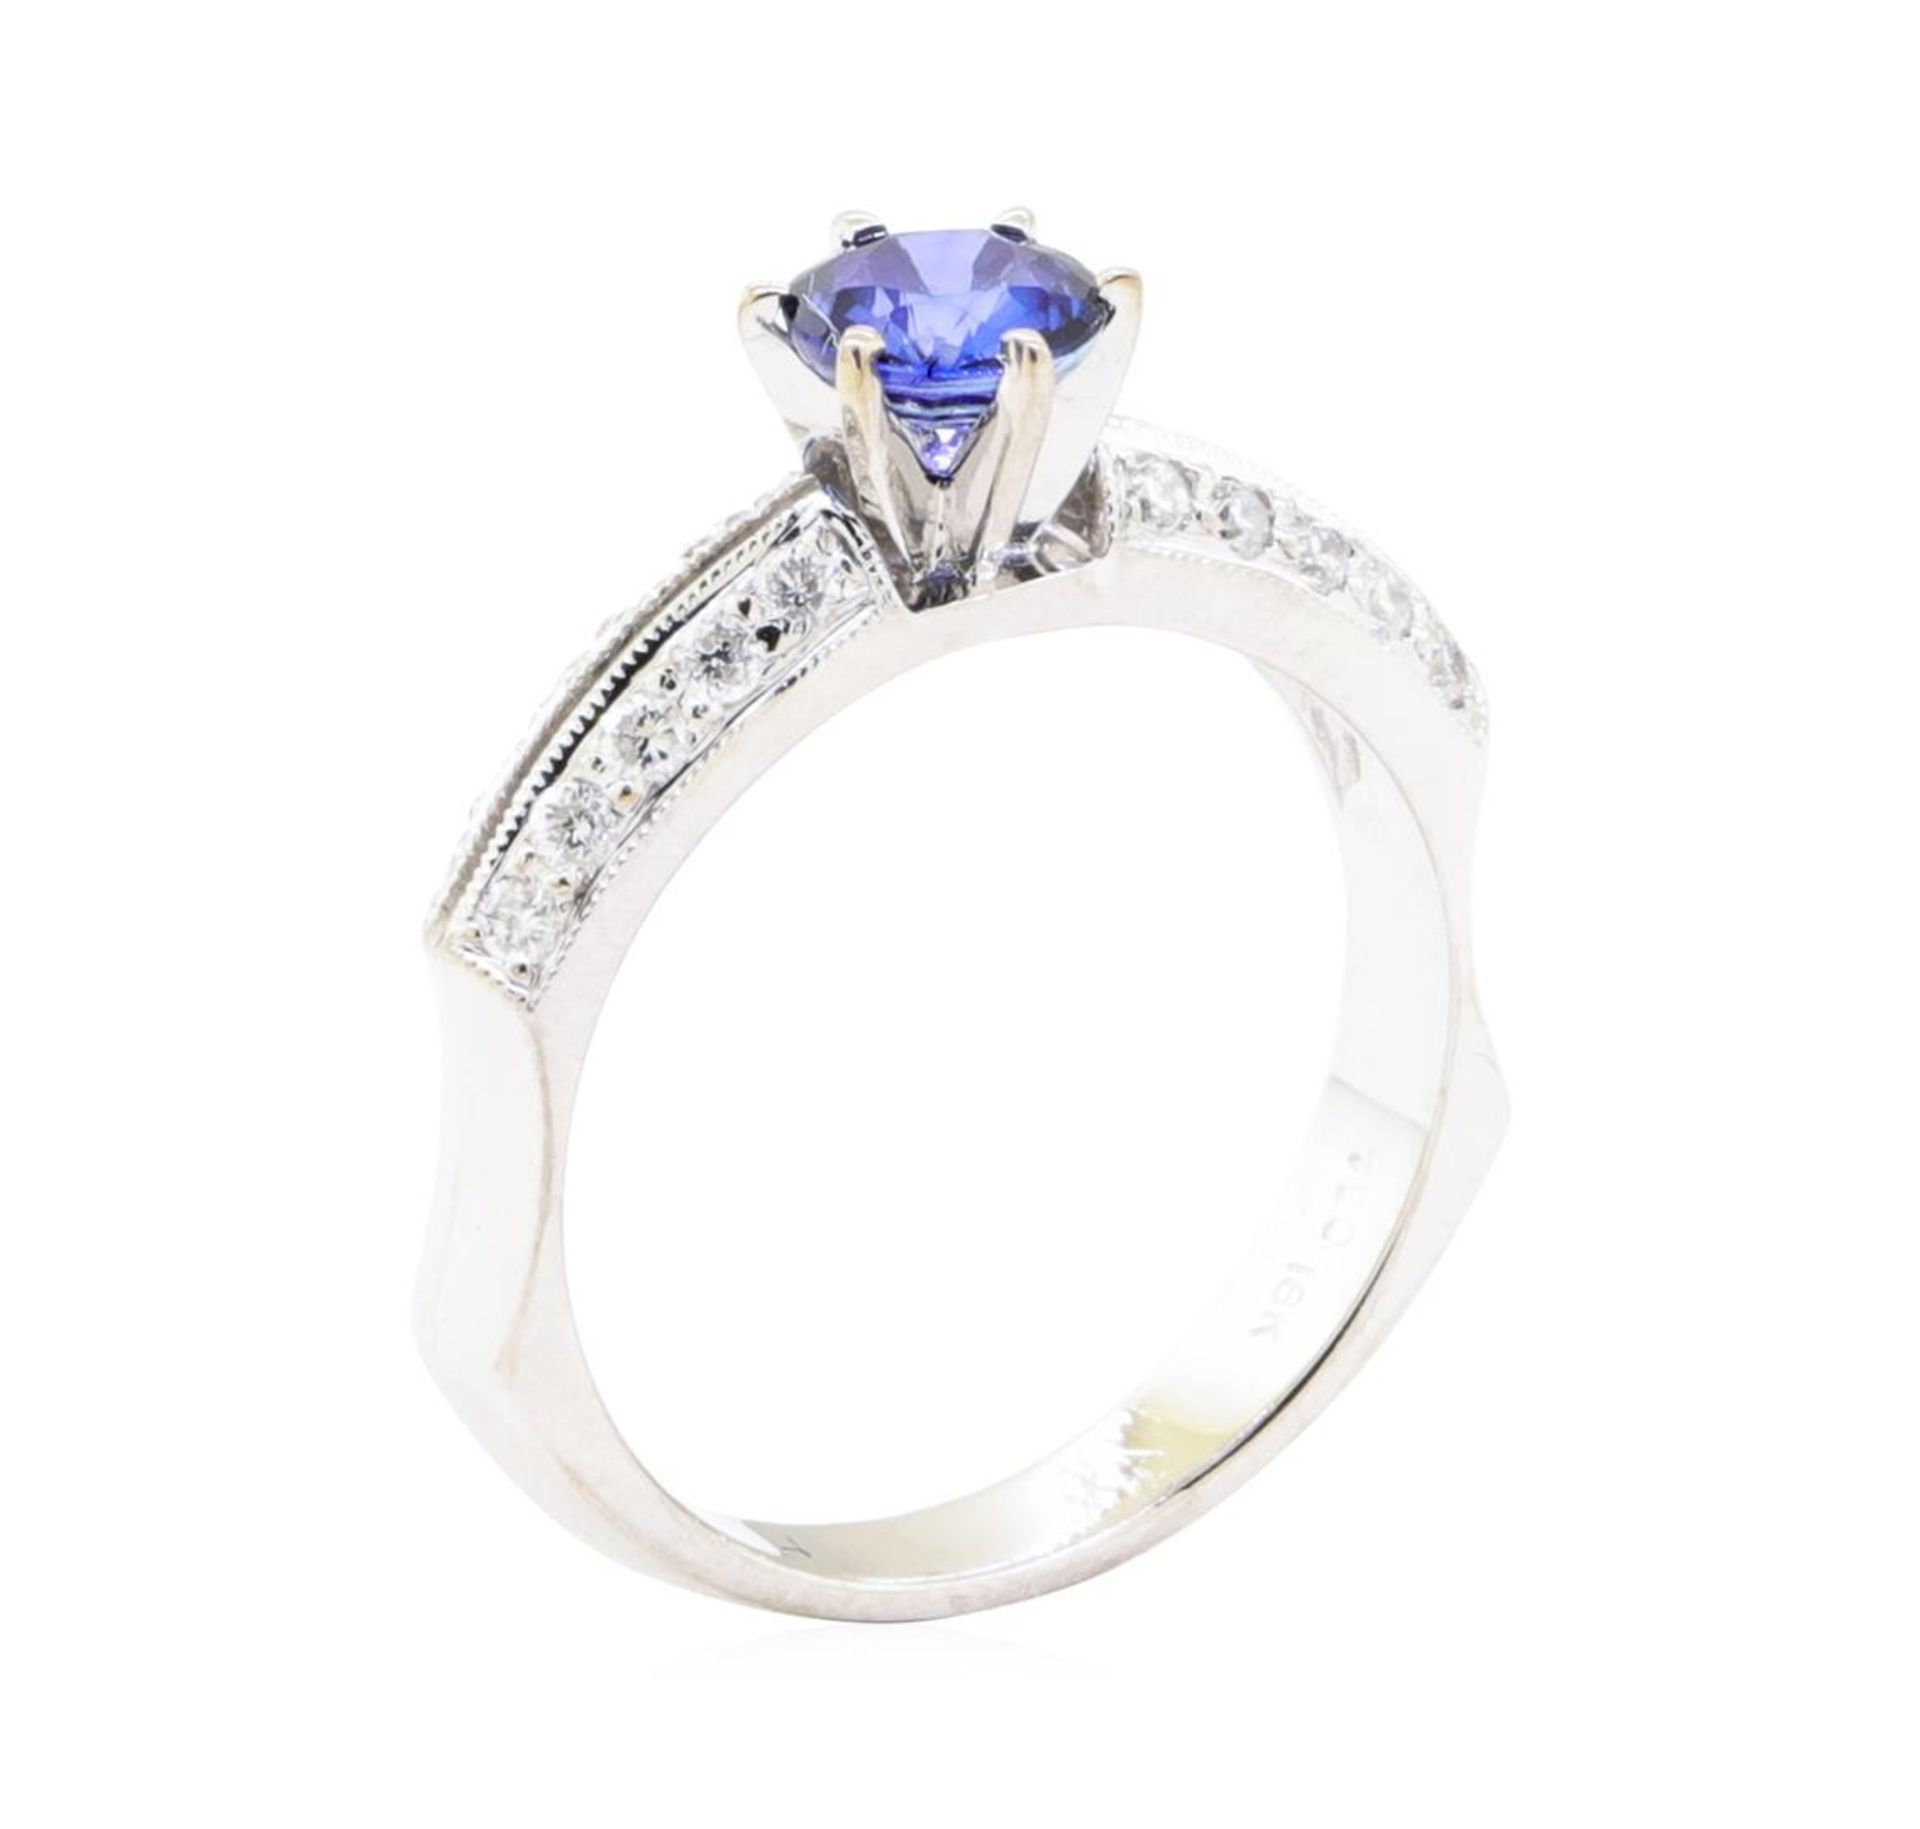 0.95 ctw Sapphire And Diamond Ring - 18KT White Gold - Image 8 of 10